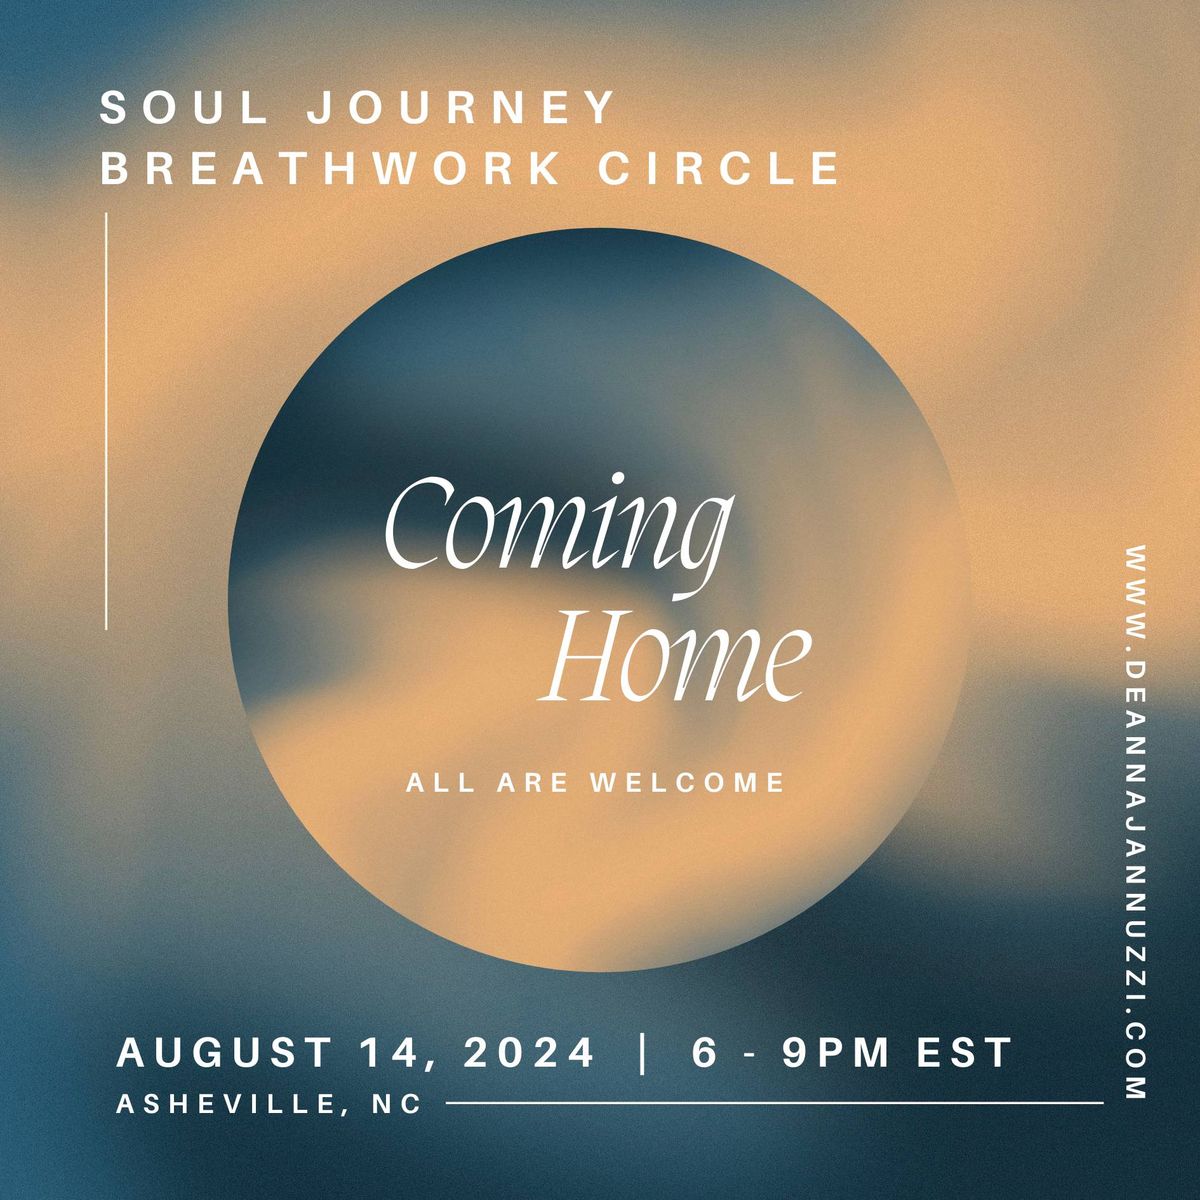 Soul Journey Breathwork Circle - Coming Home